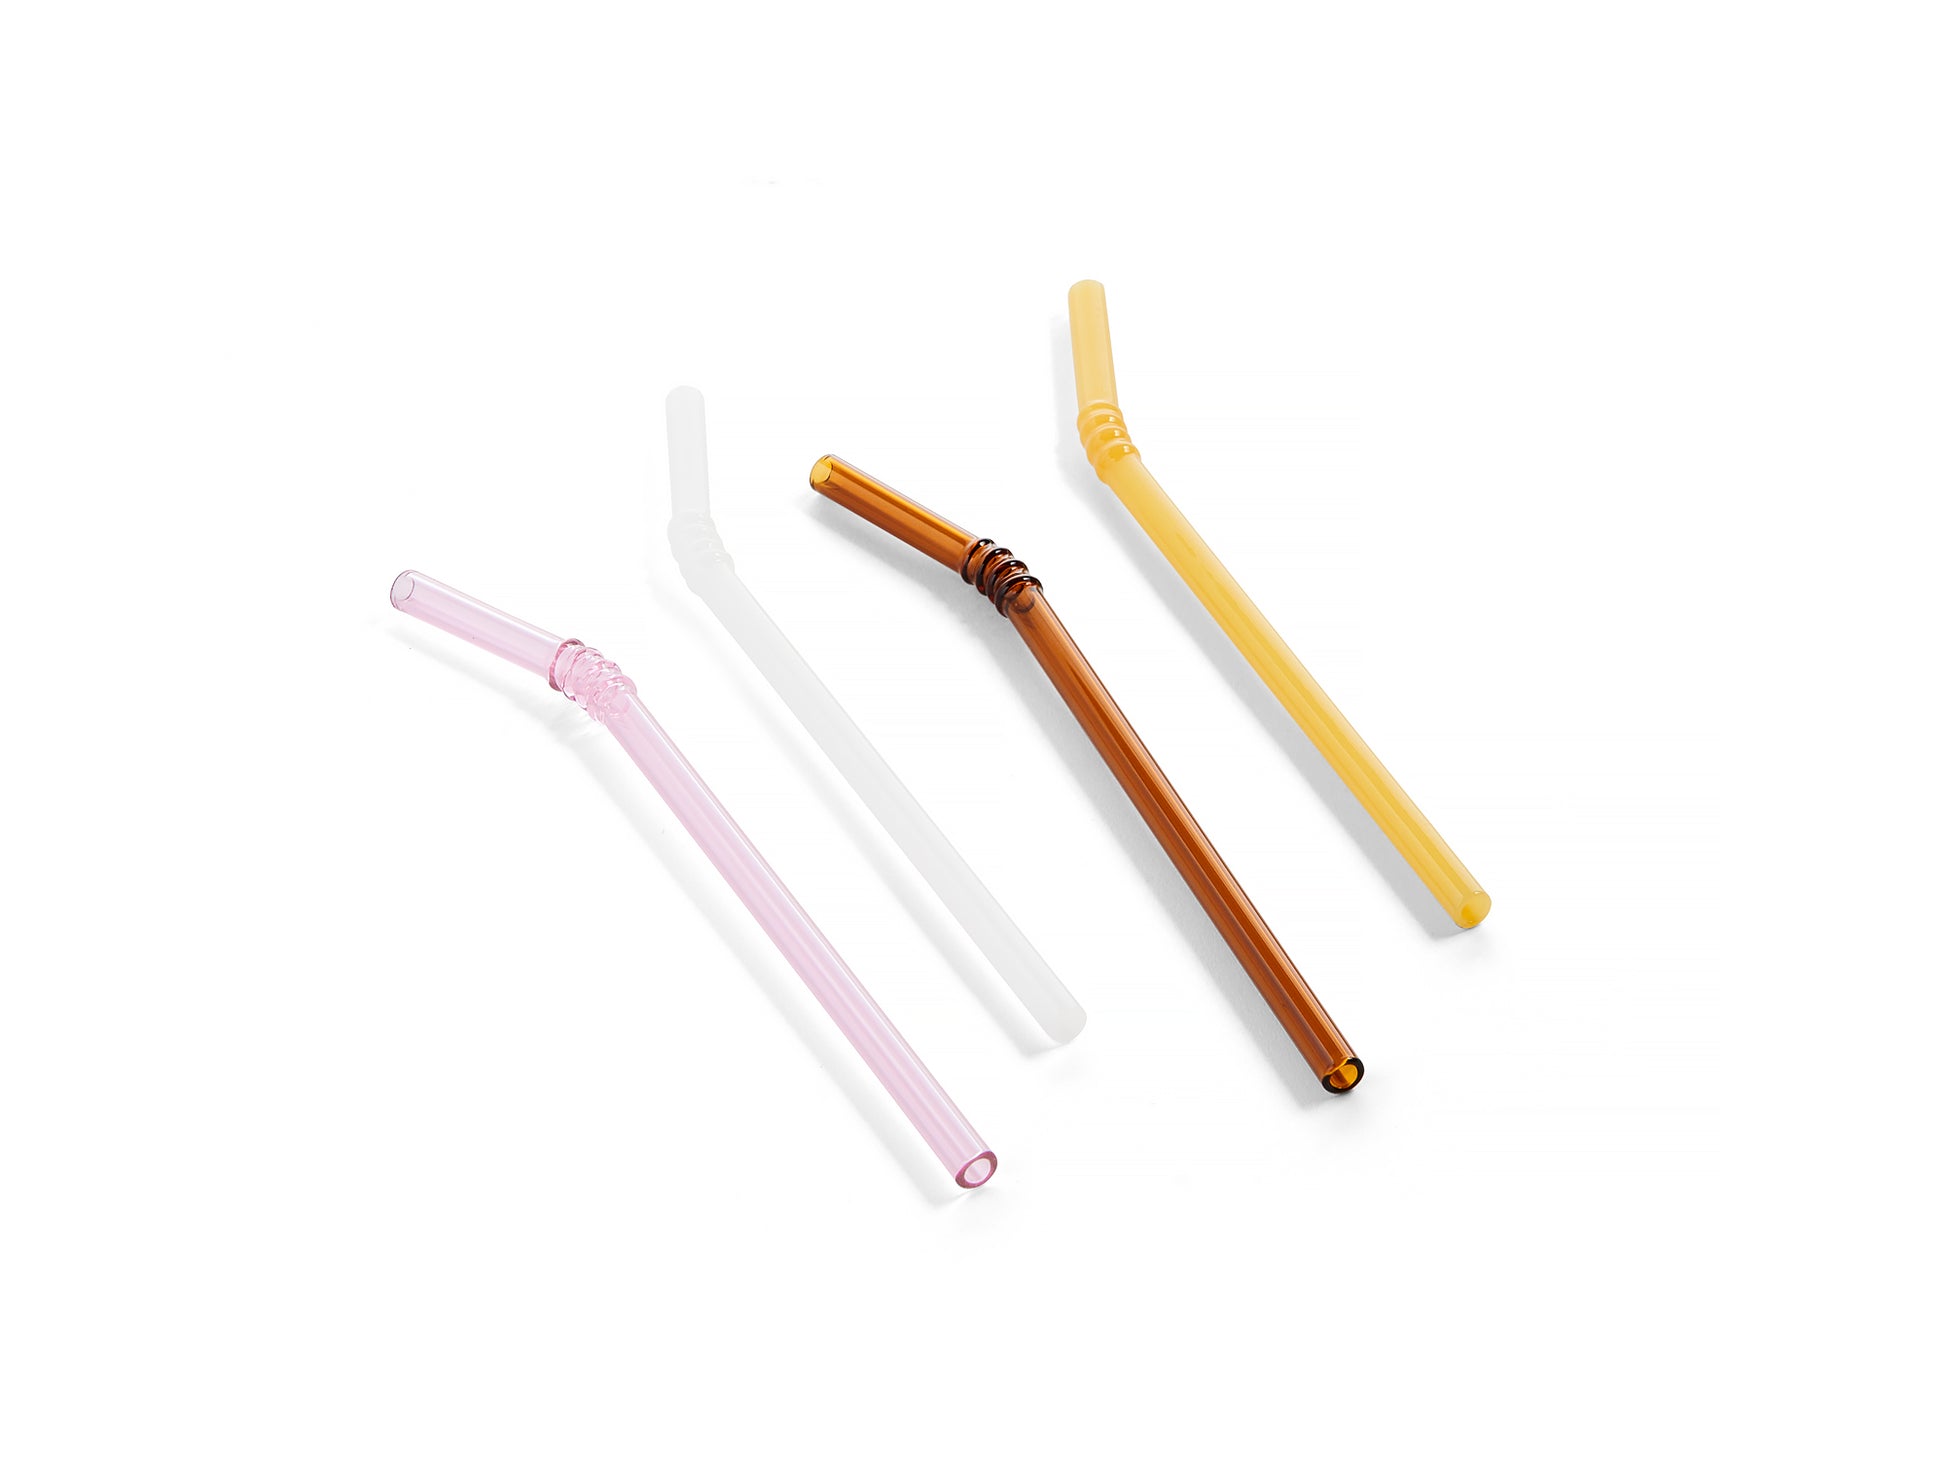 Sip - Swirl Set of 4 Straws / Opaque Mix by HAY